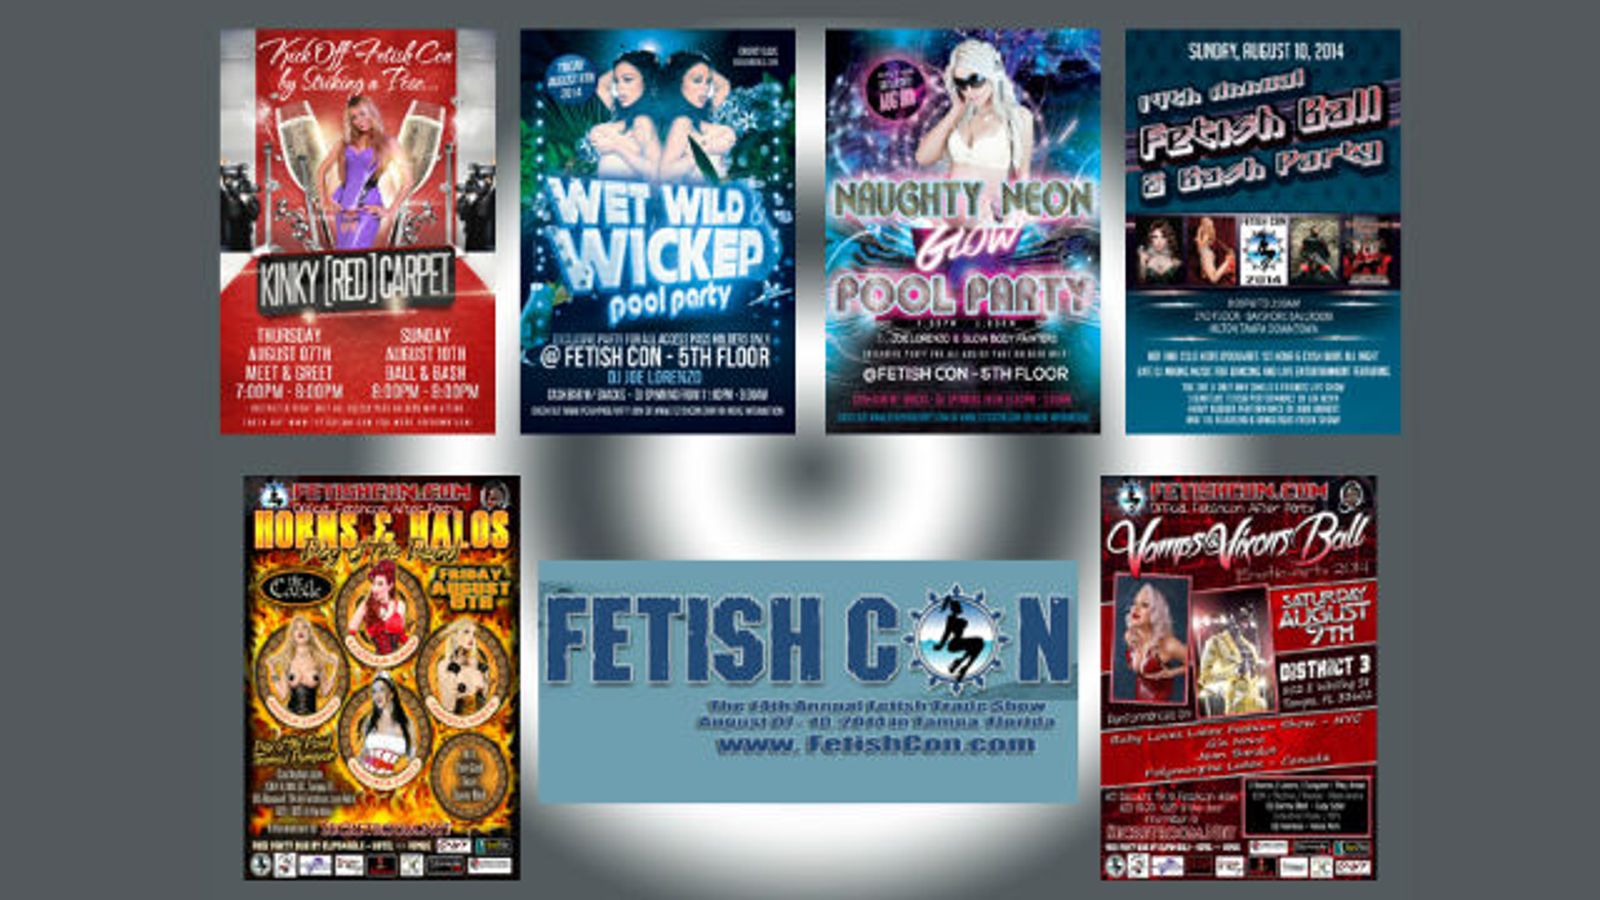 Fetish Con 2014 Releases Official Party, After-Party Schedule